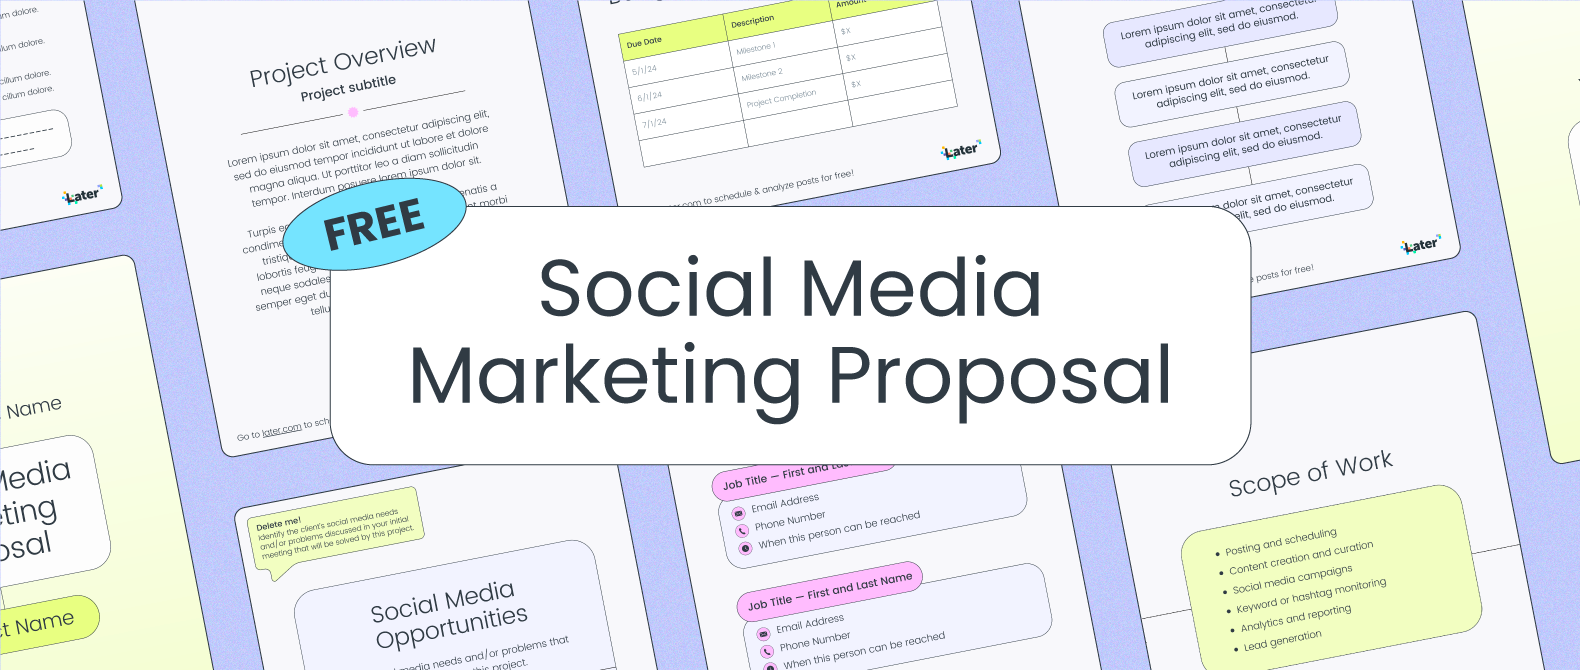 Decorative header for Later’s free social media proposal template.